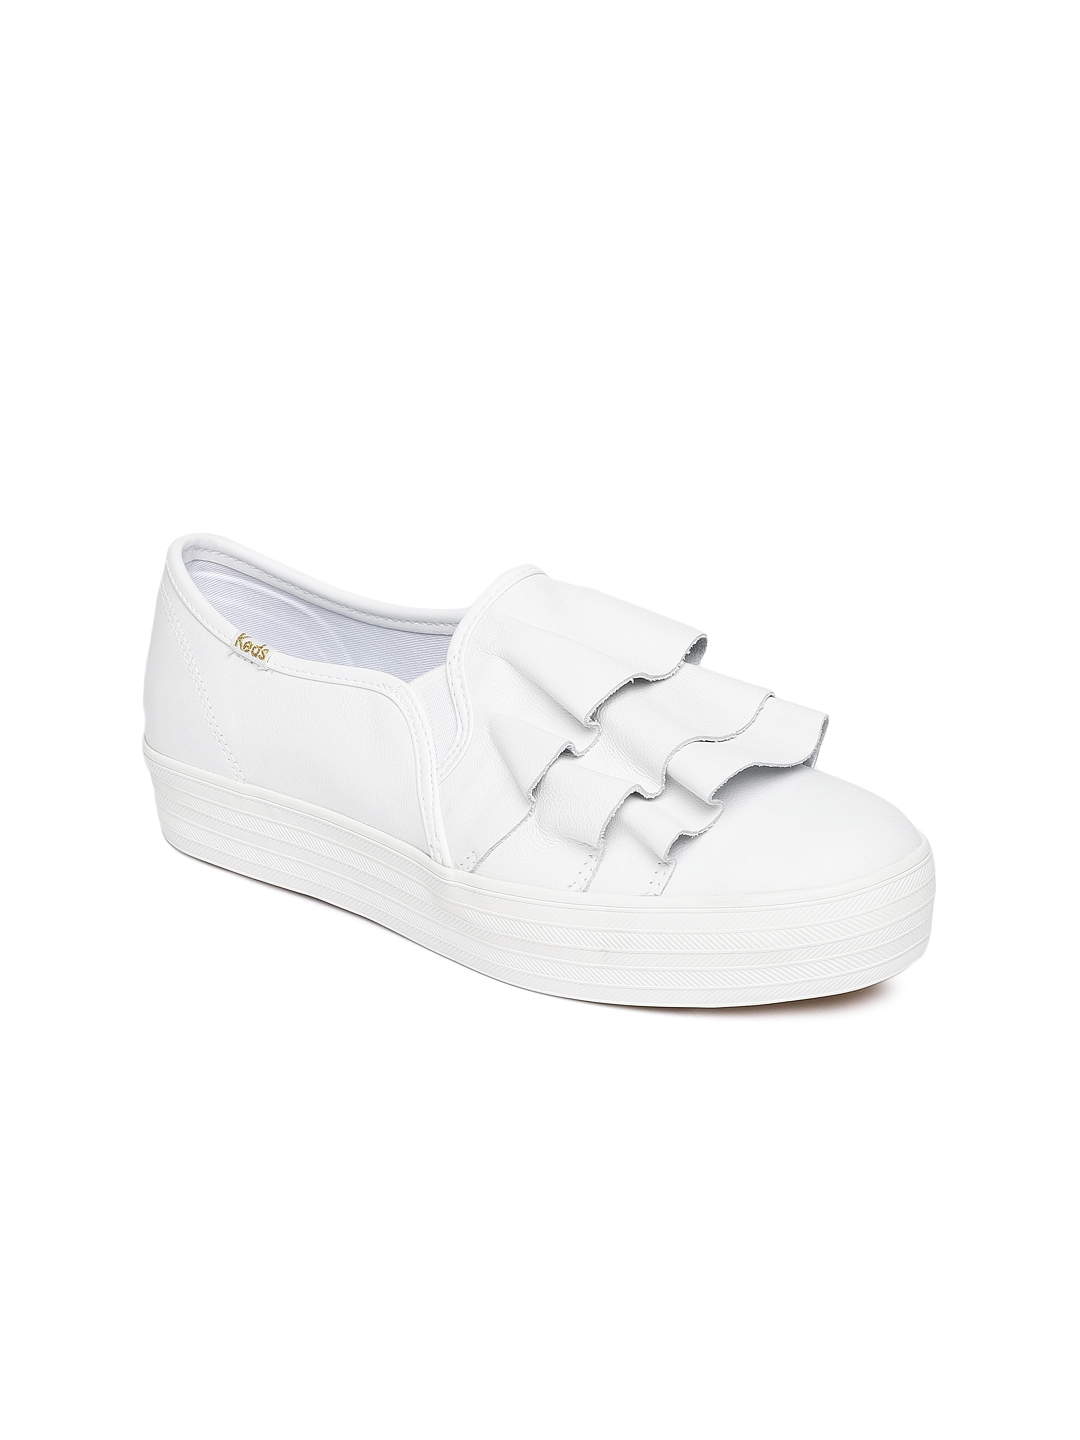 Buy Keds Women White Leather Sneakers - Casual Shoes for Women 8259215 ...